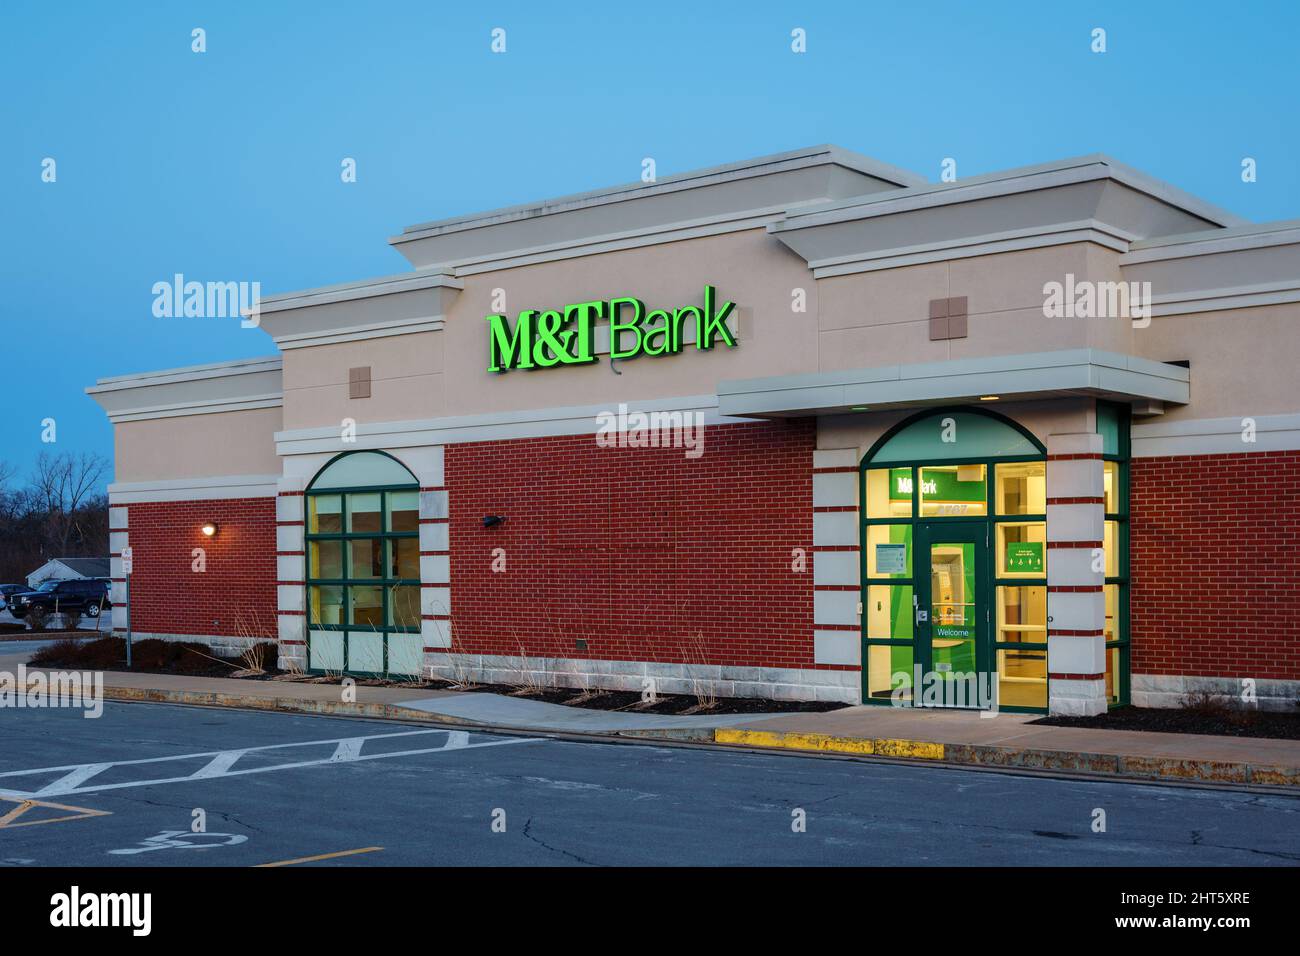 New Hartford, New York - Feb 24, 2022: Closeup Night View of M&T Bank Entrance. M&T Bank Corporation is an American bank holding co. headquartered in Stock Photo